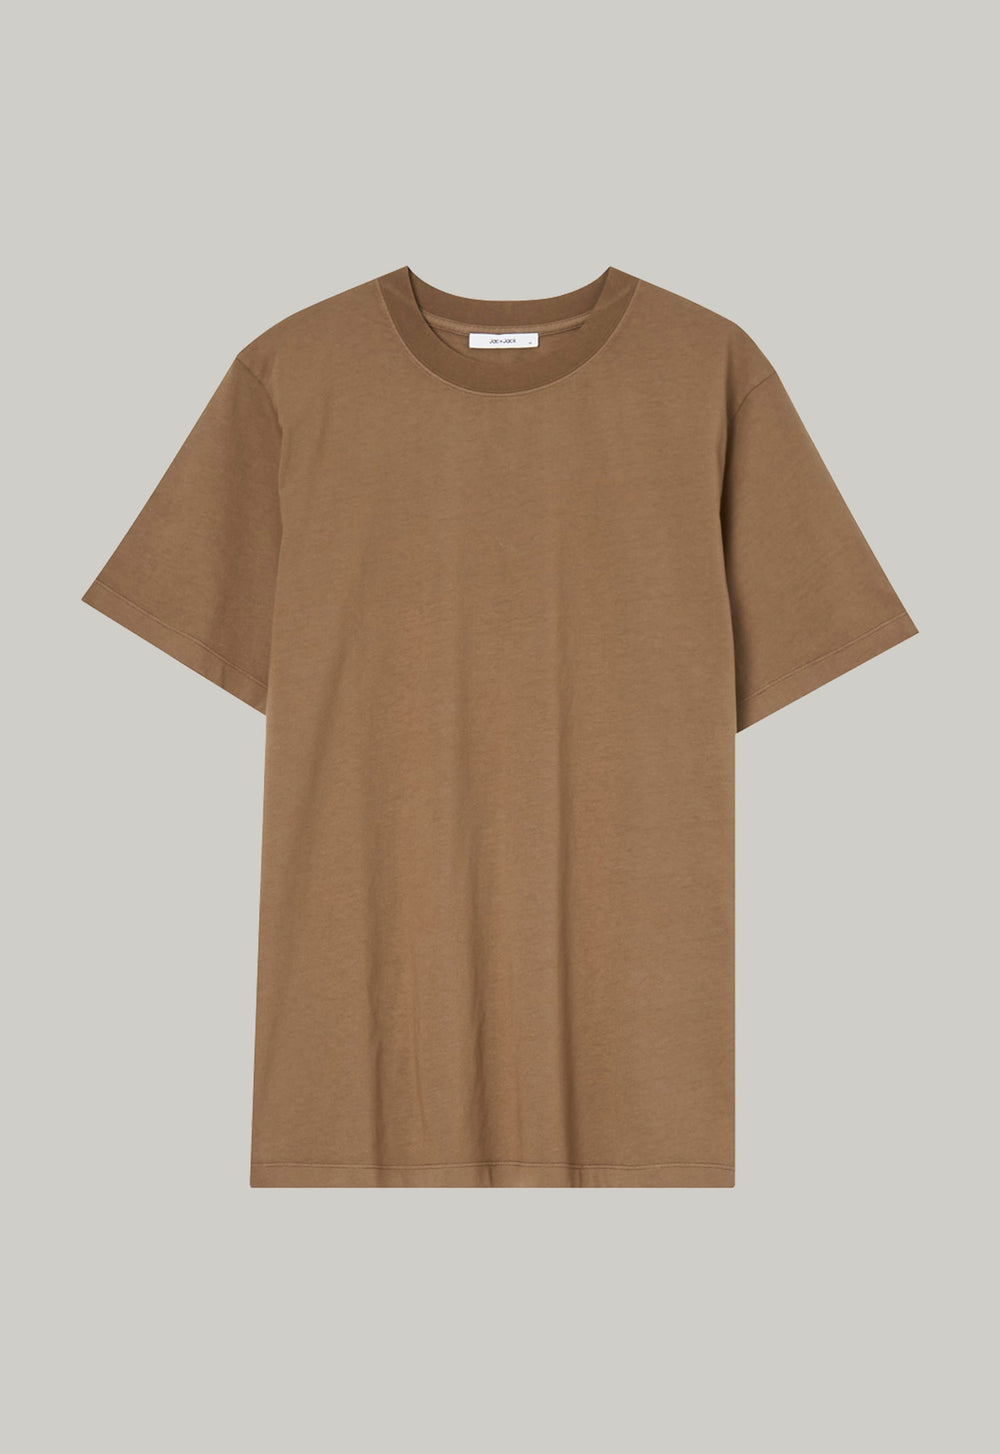 Jac+Jack MILLS COTTON TEE in Leatherette